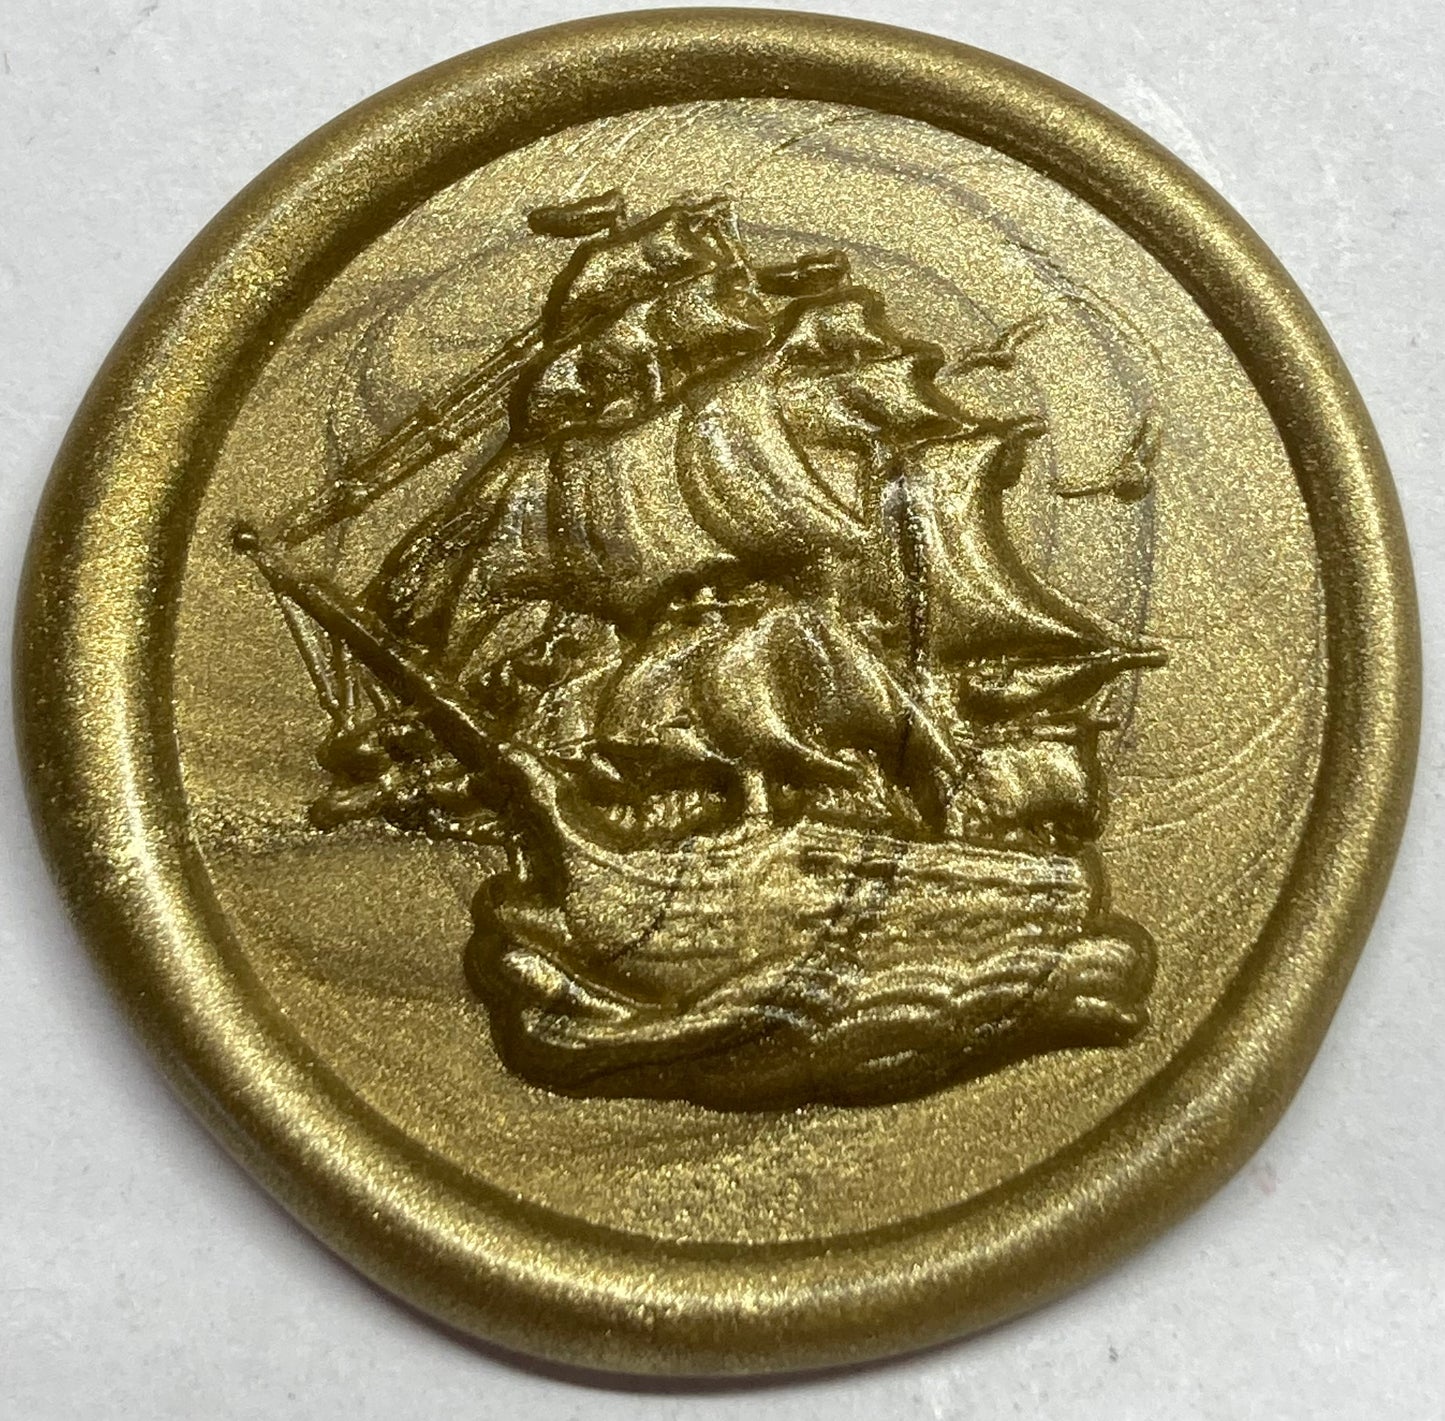 Galleon Pirate Ship 1.2" dia. 3D-engraved Wax Seal Stamp Head